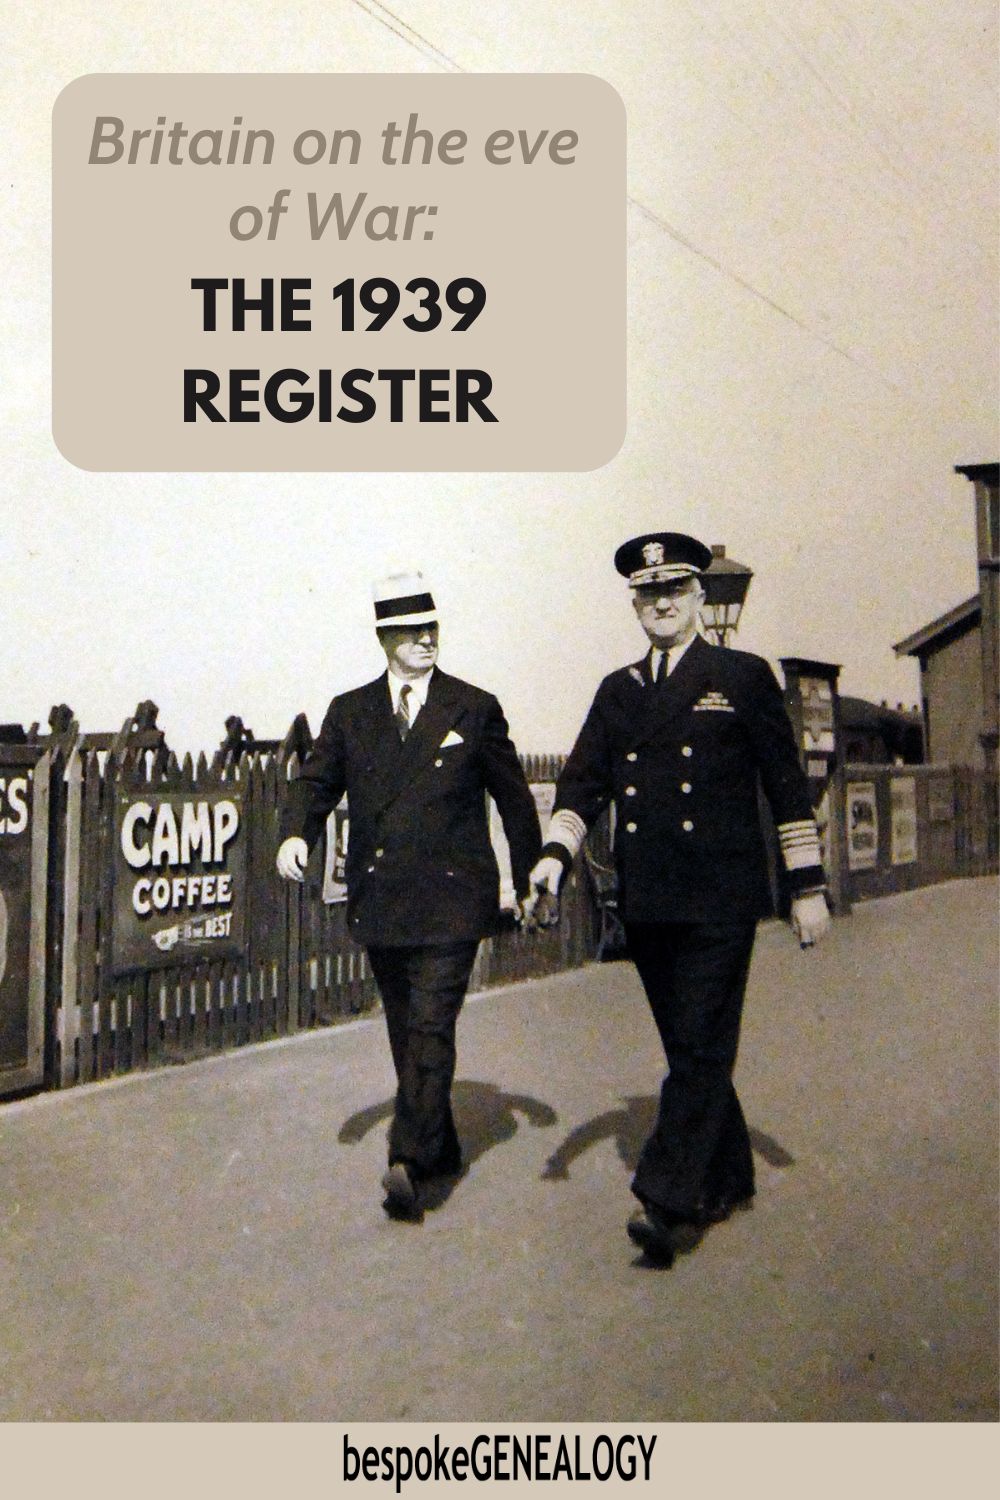 Britain on the eve of war: The 1939 Register. Photo taken in 1939 showing a senior Royal Naval officer and a man in a suit and hat working down a railway platform